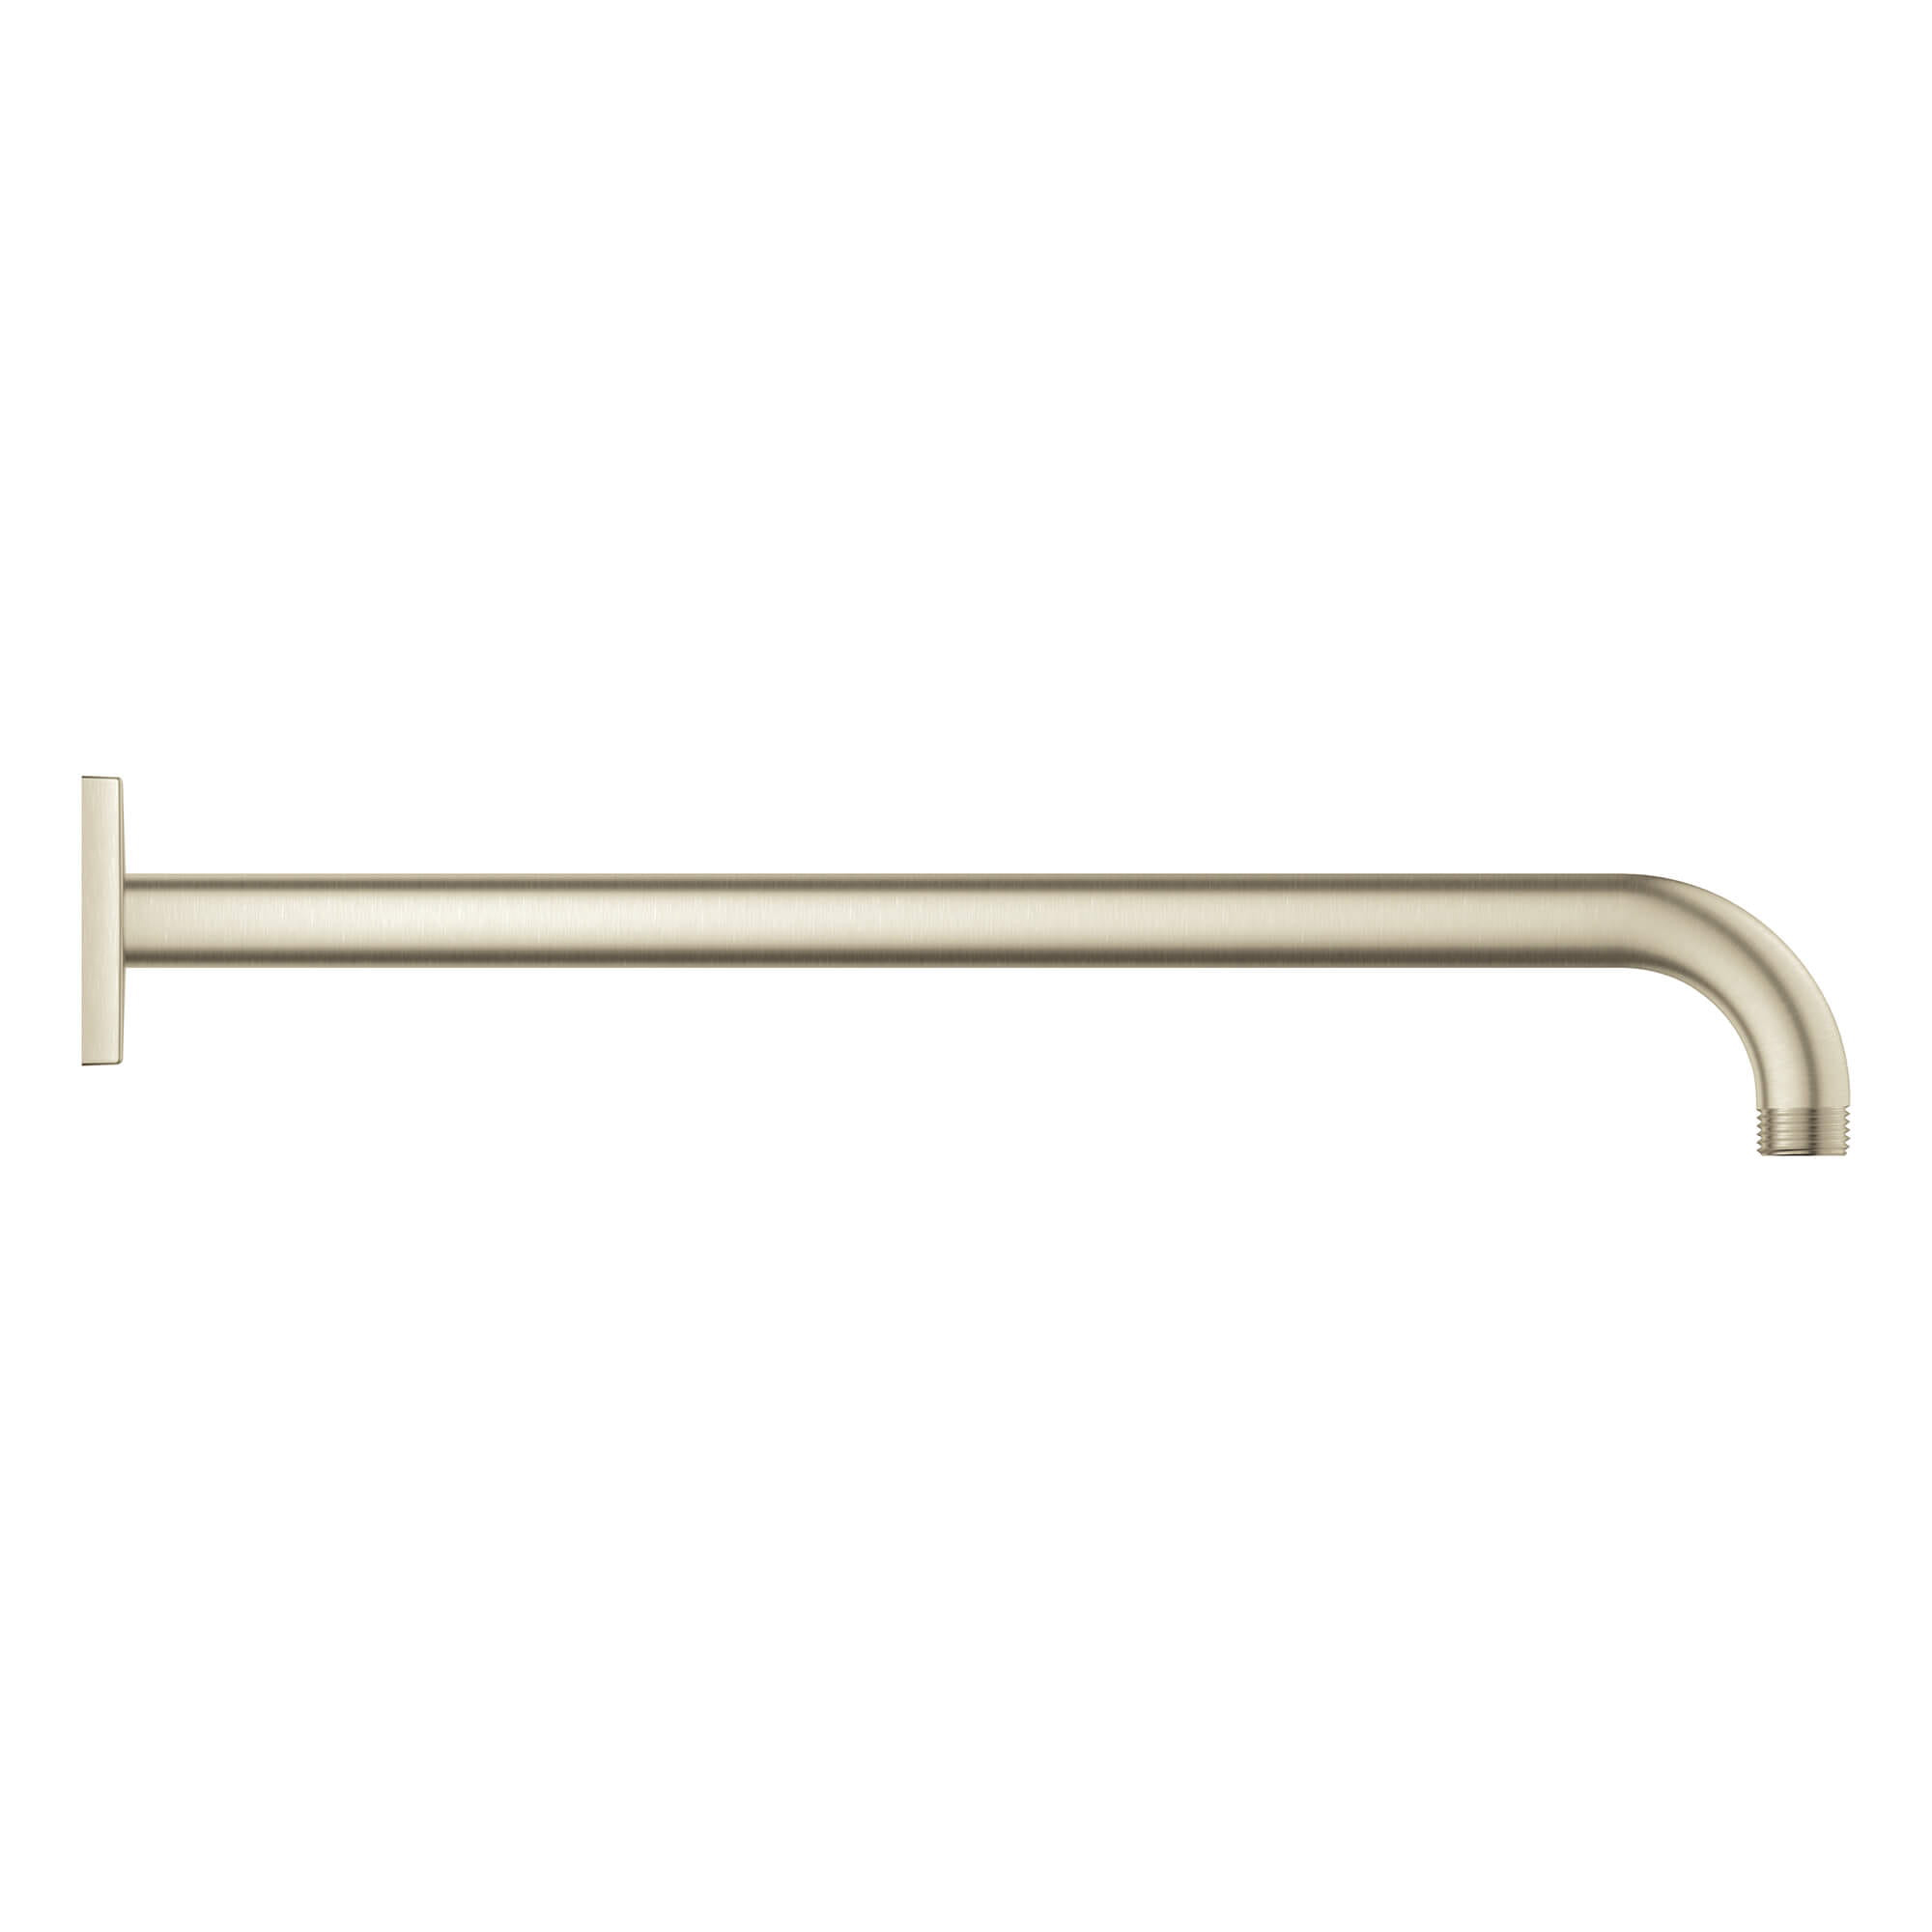 Rainshower Wall Mount Shower Arm & Flange In Brushed Nickel Infinity Finish